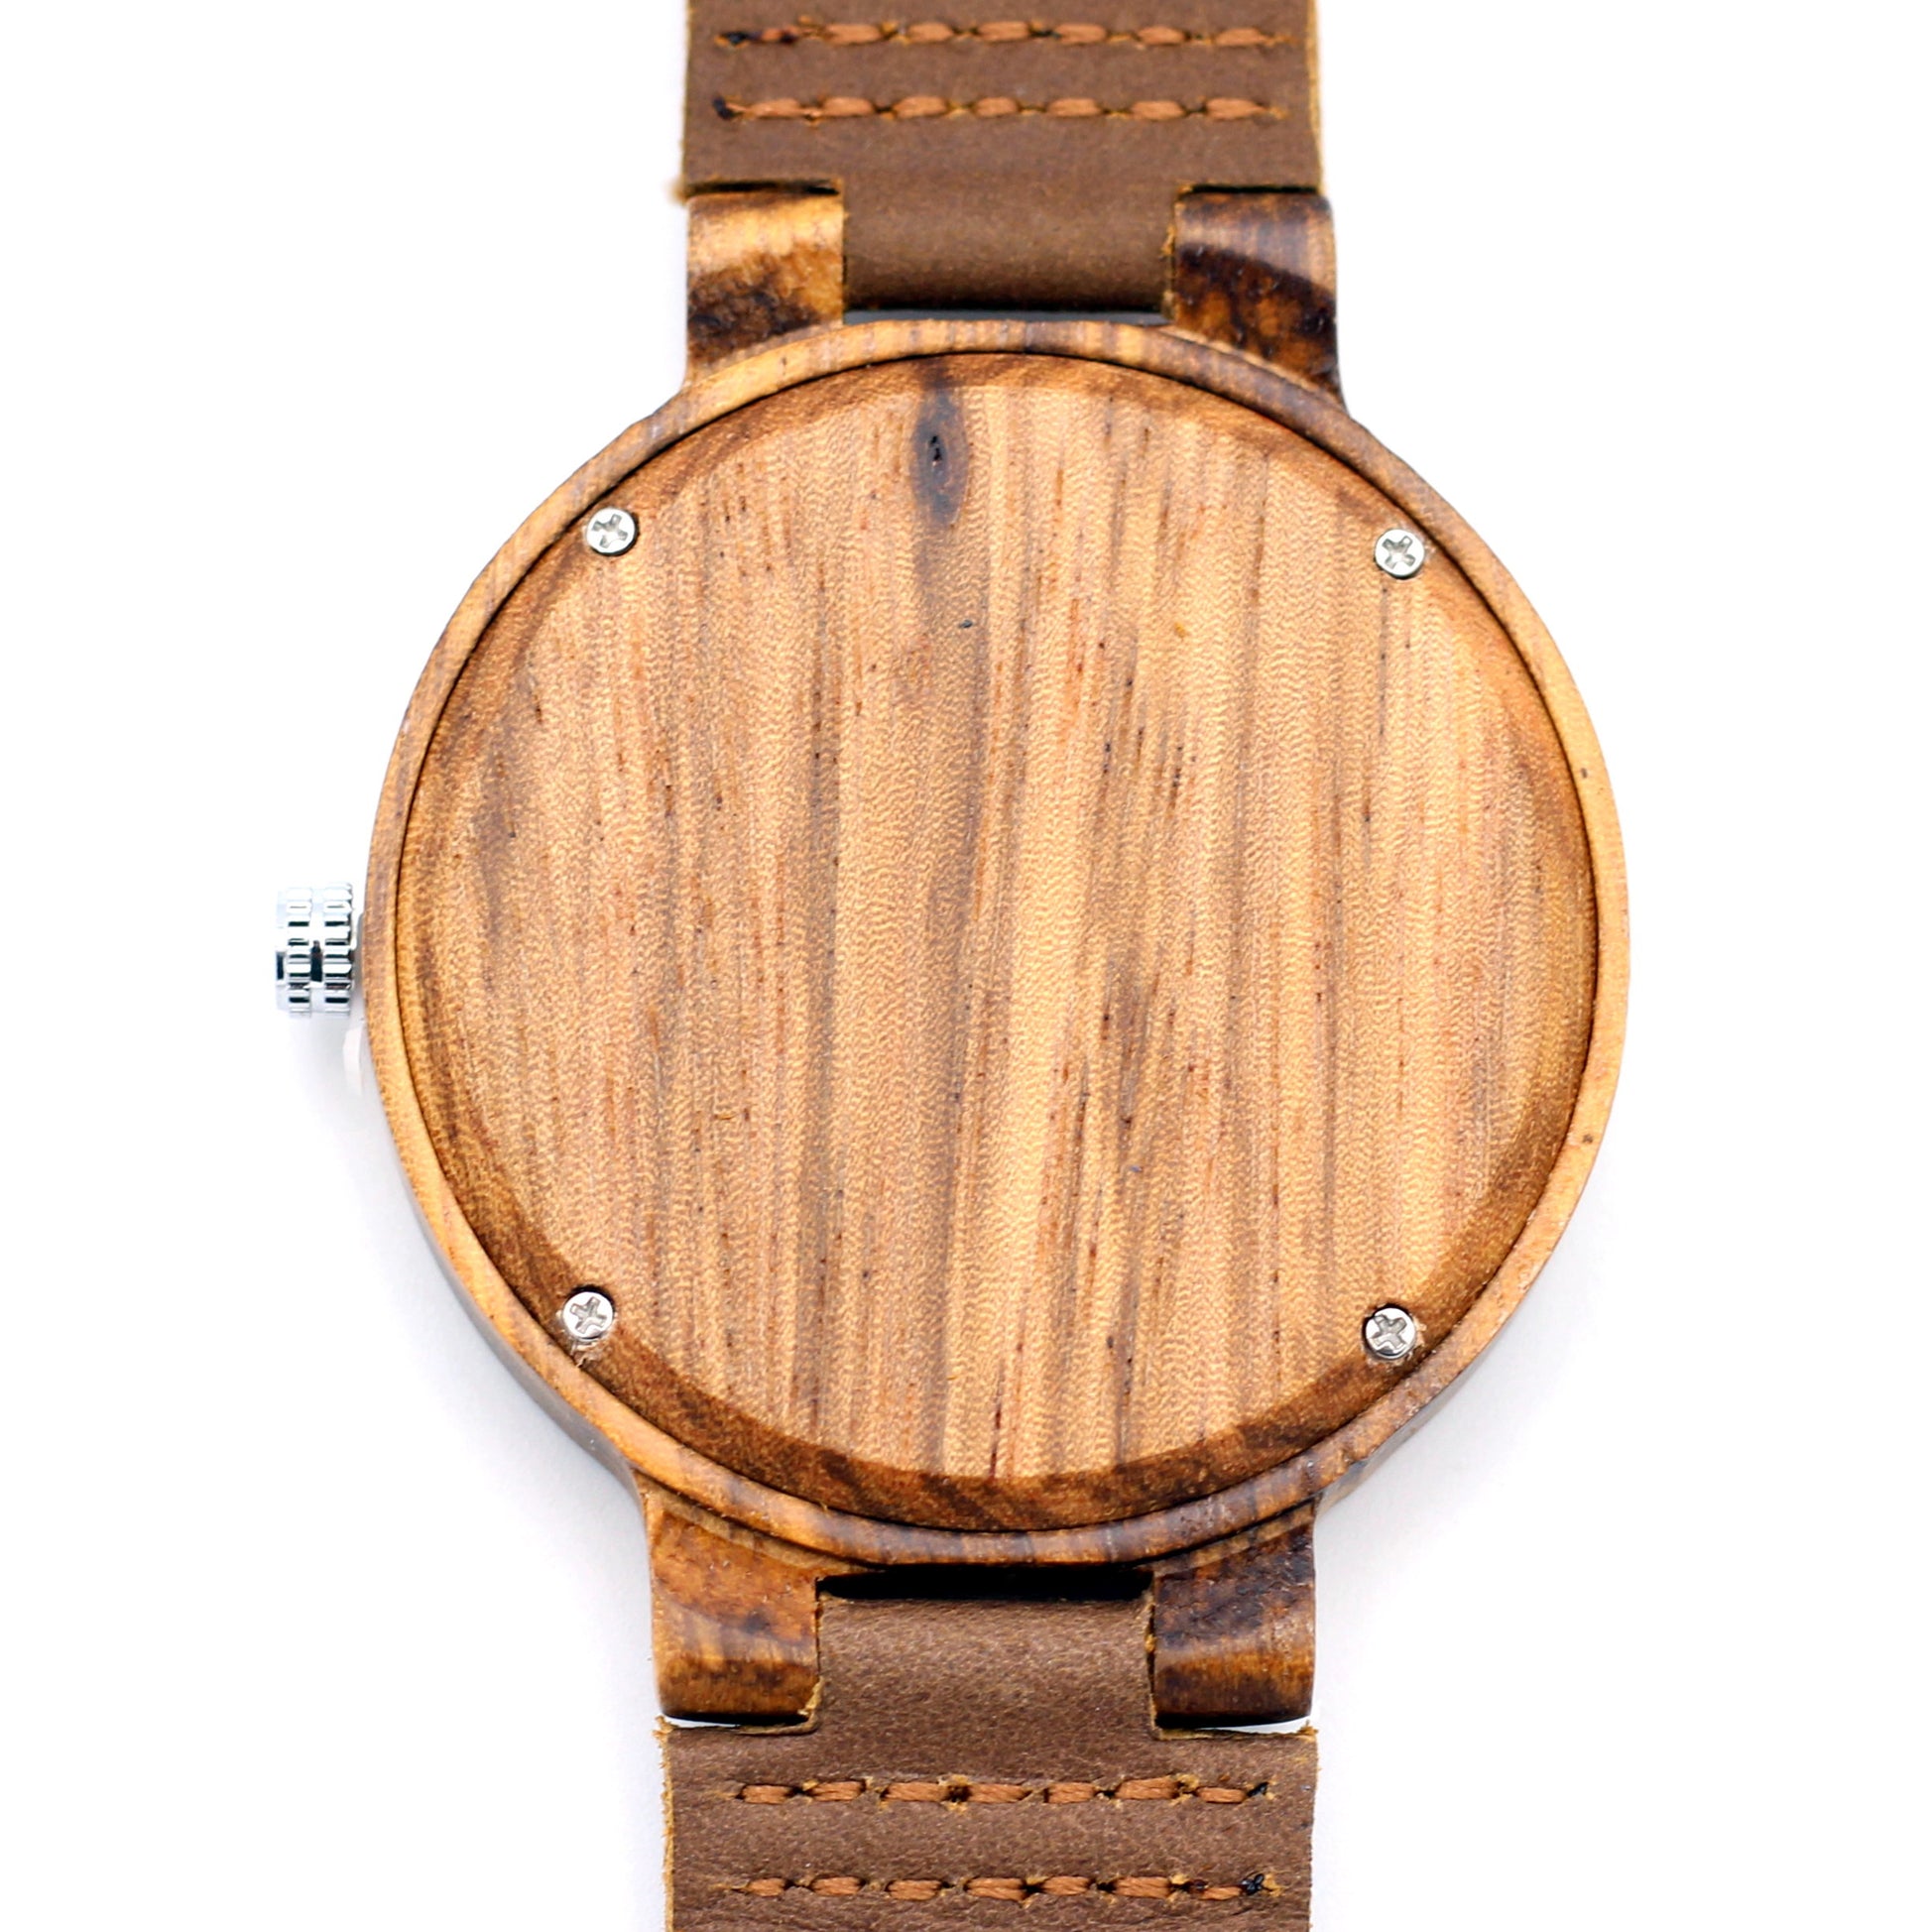 Manly Tawny mens wooden watch in very natural tones. Add engraving on the back for R100. Striking red second hand for a touch of colour.